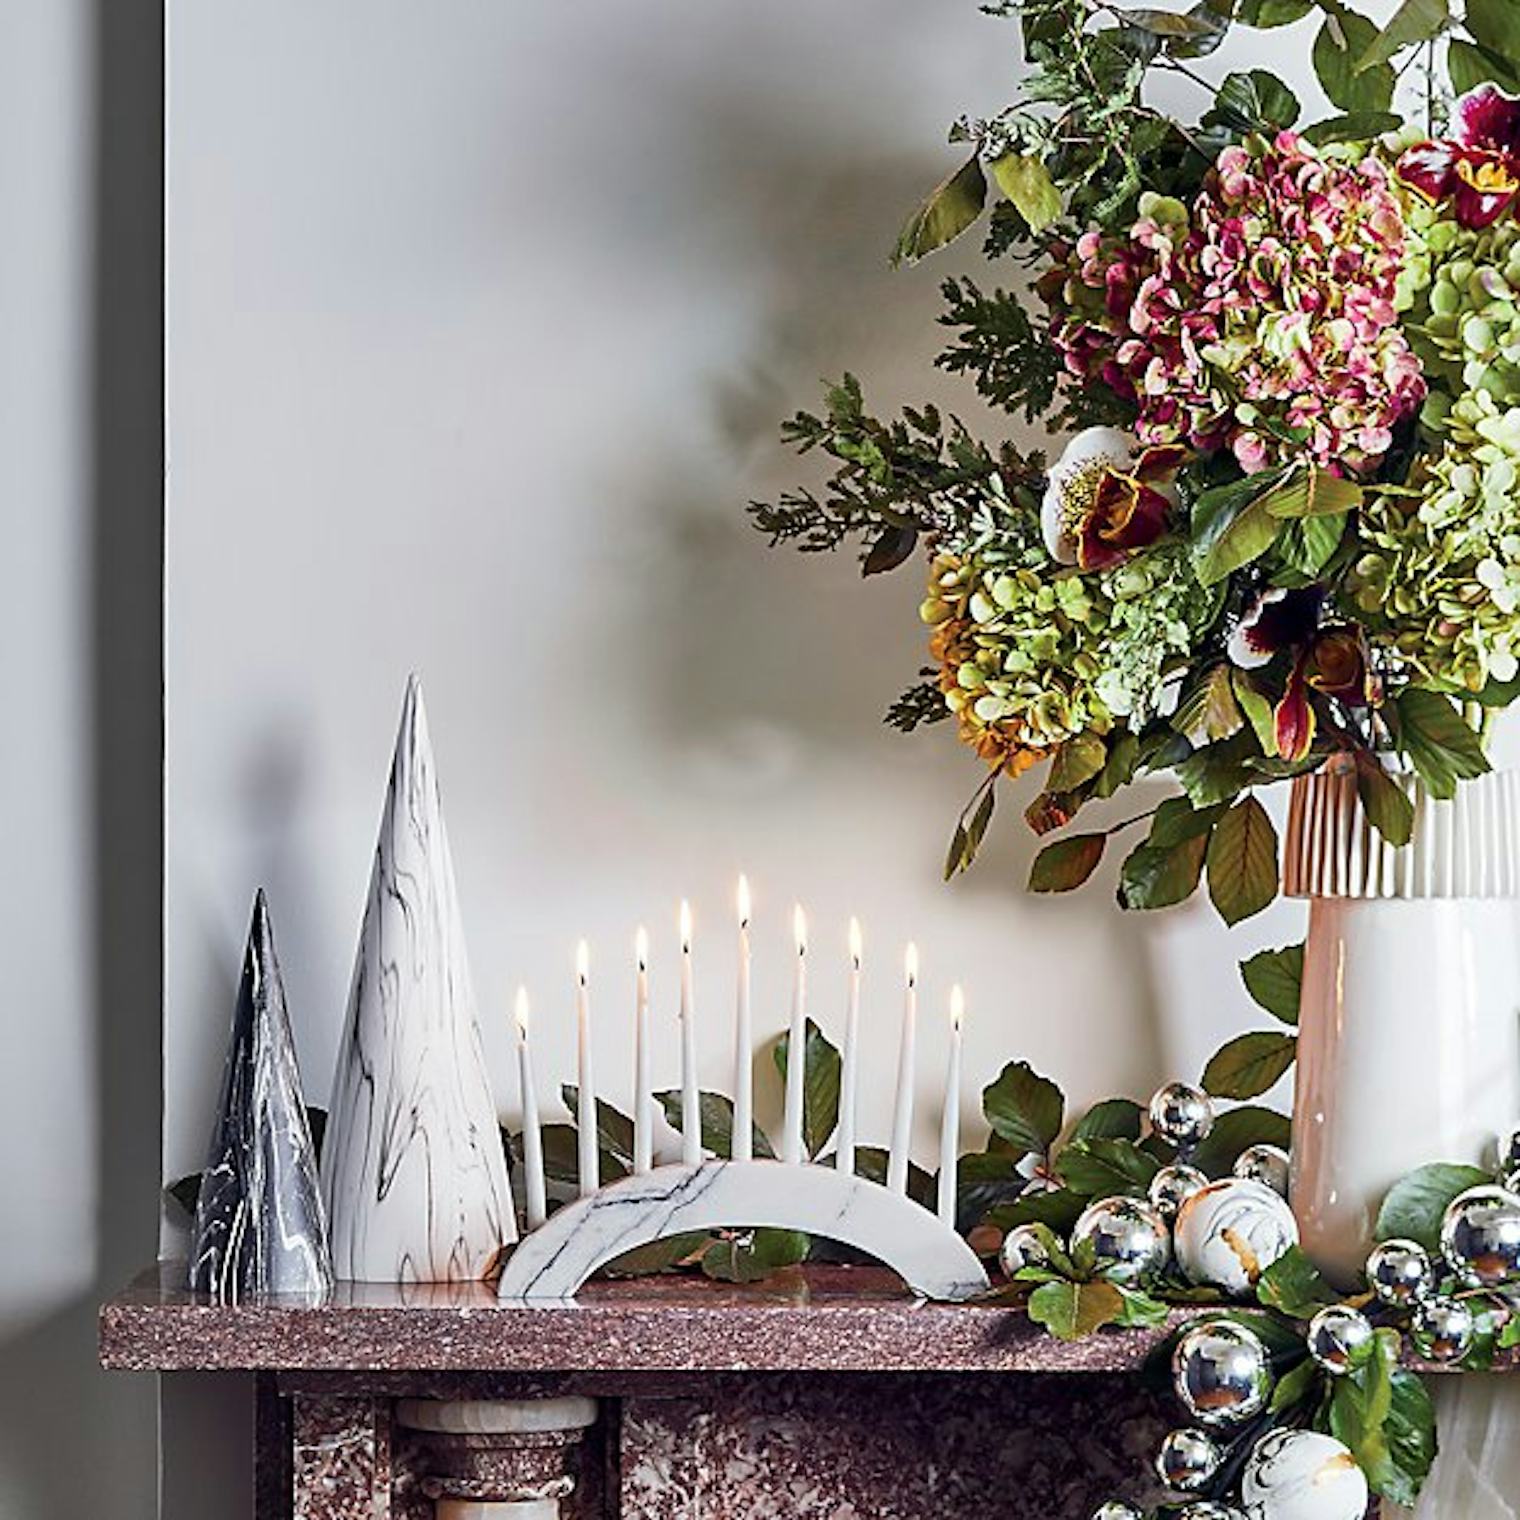 The Holiday 2020 Decor Trends We're Seeing Absolutely Everywhere